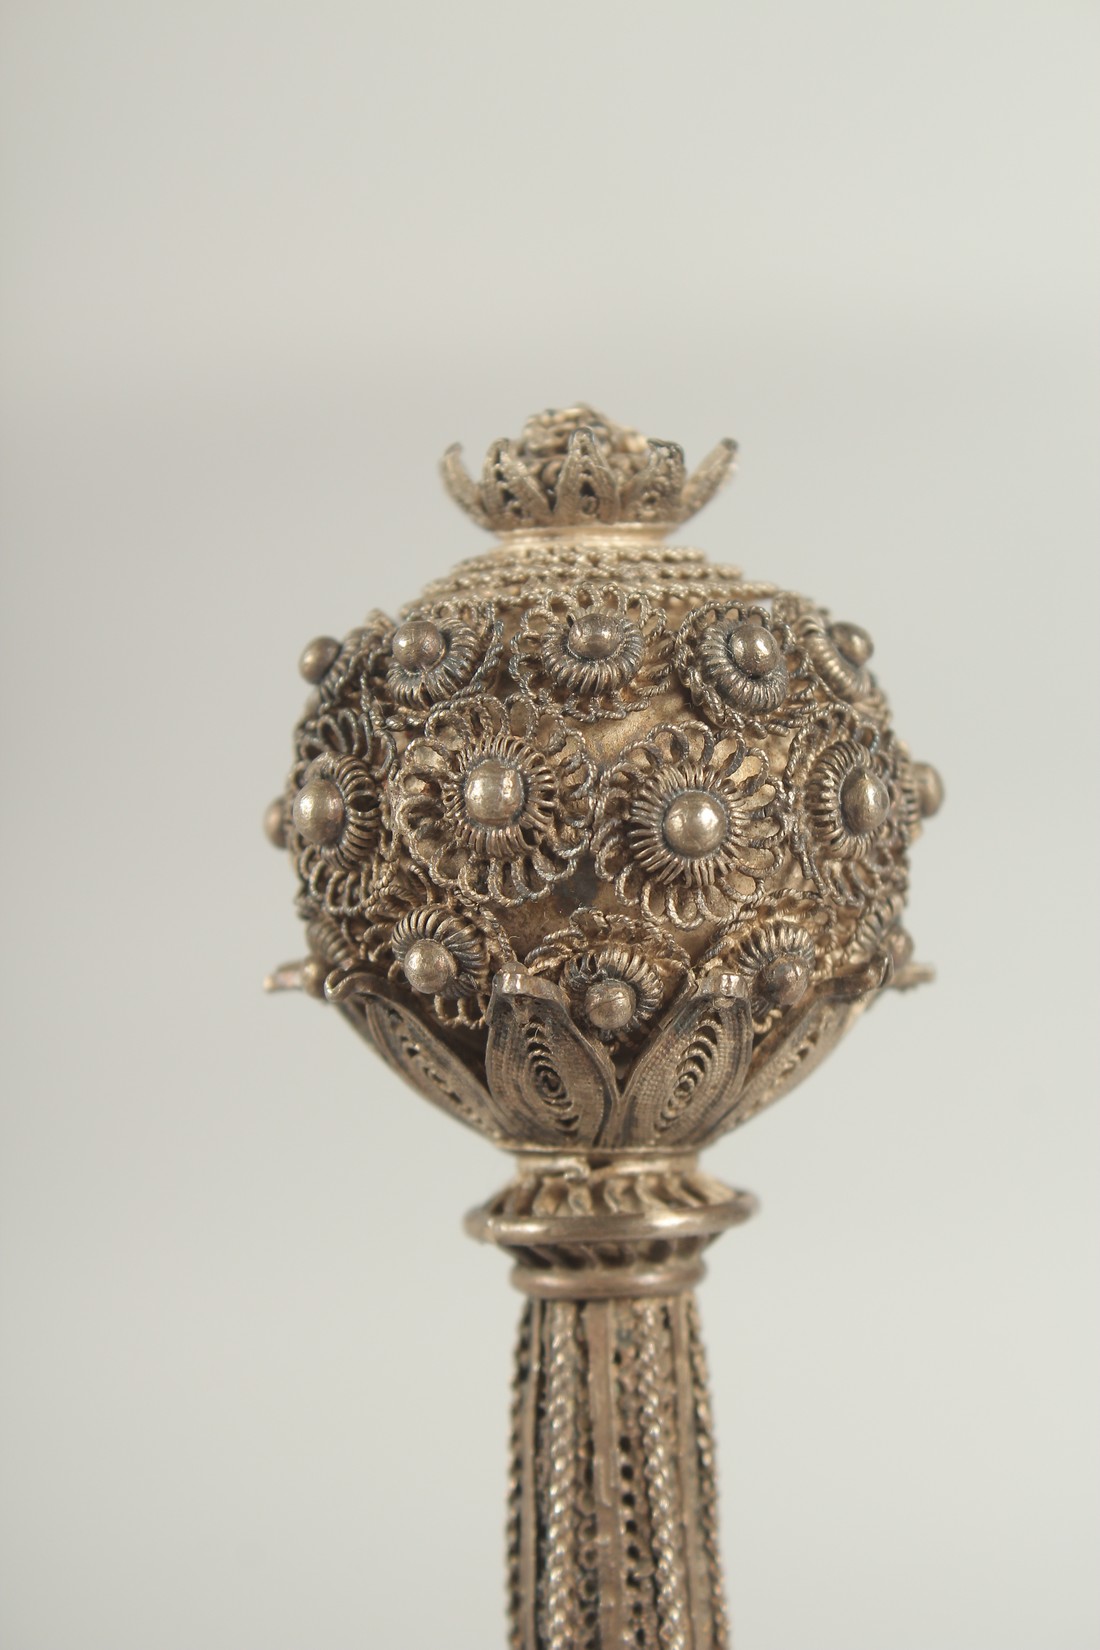 A FINE 19TH CENTURY INDIAN SILVER FILIGREE ROSEWATER SPRINKLER, 27cm high. - Image 5 of 10